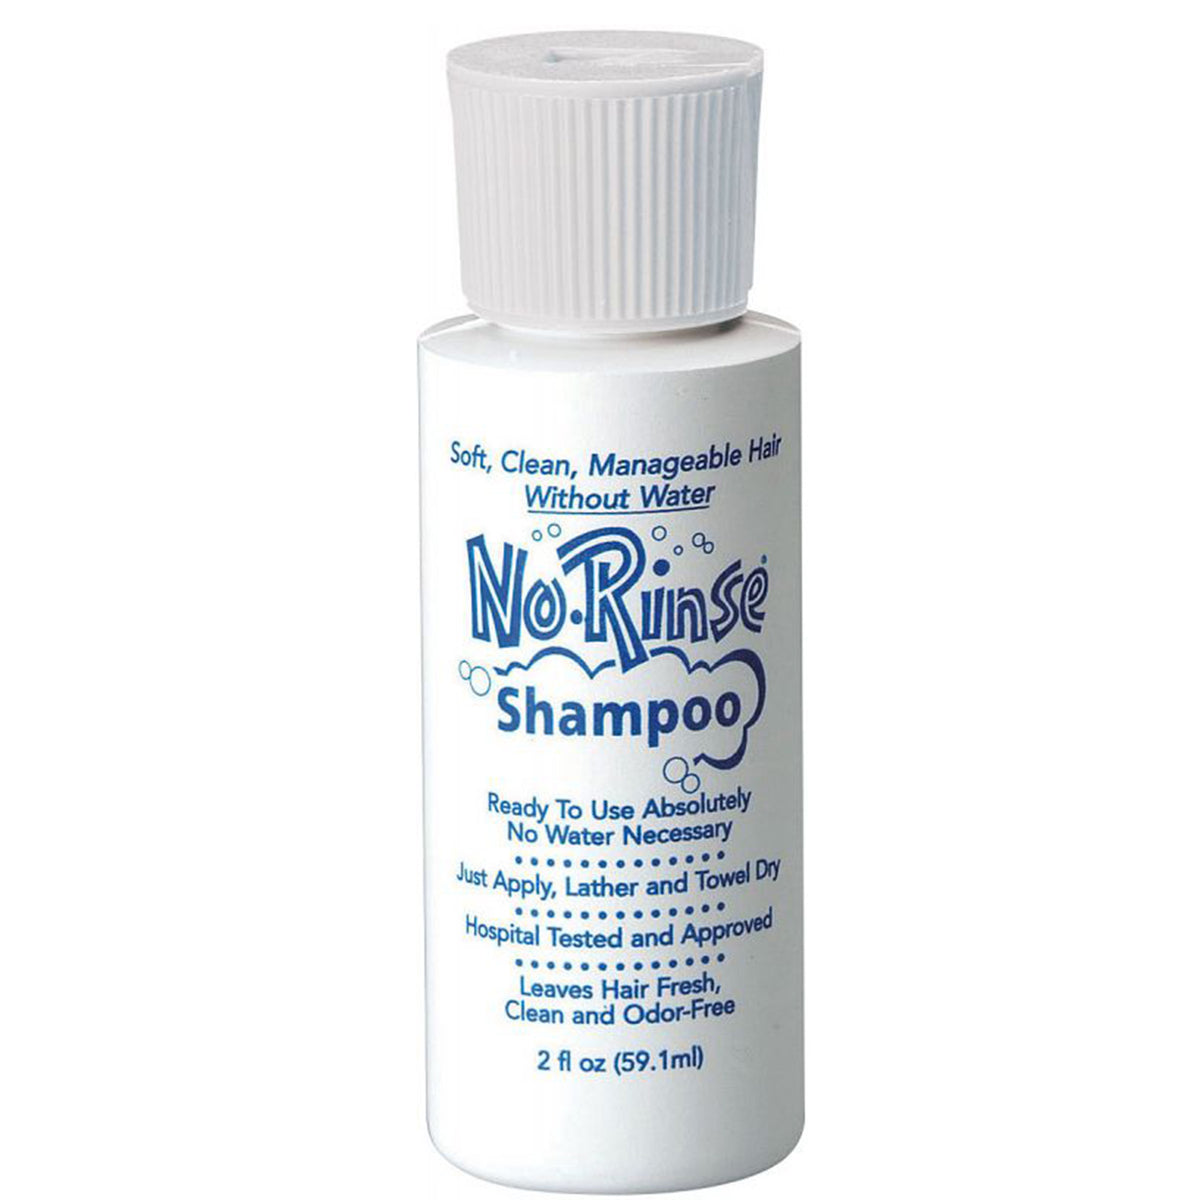 the front of the package of the 2oz container of no rinse shampoo